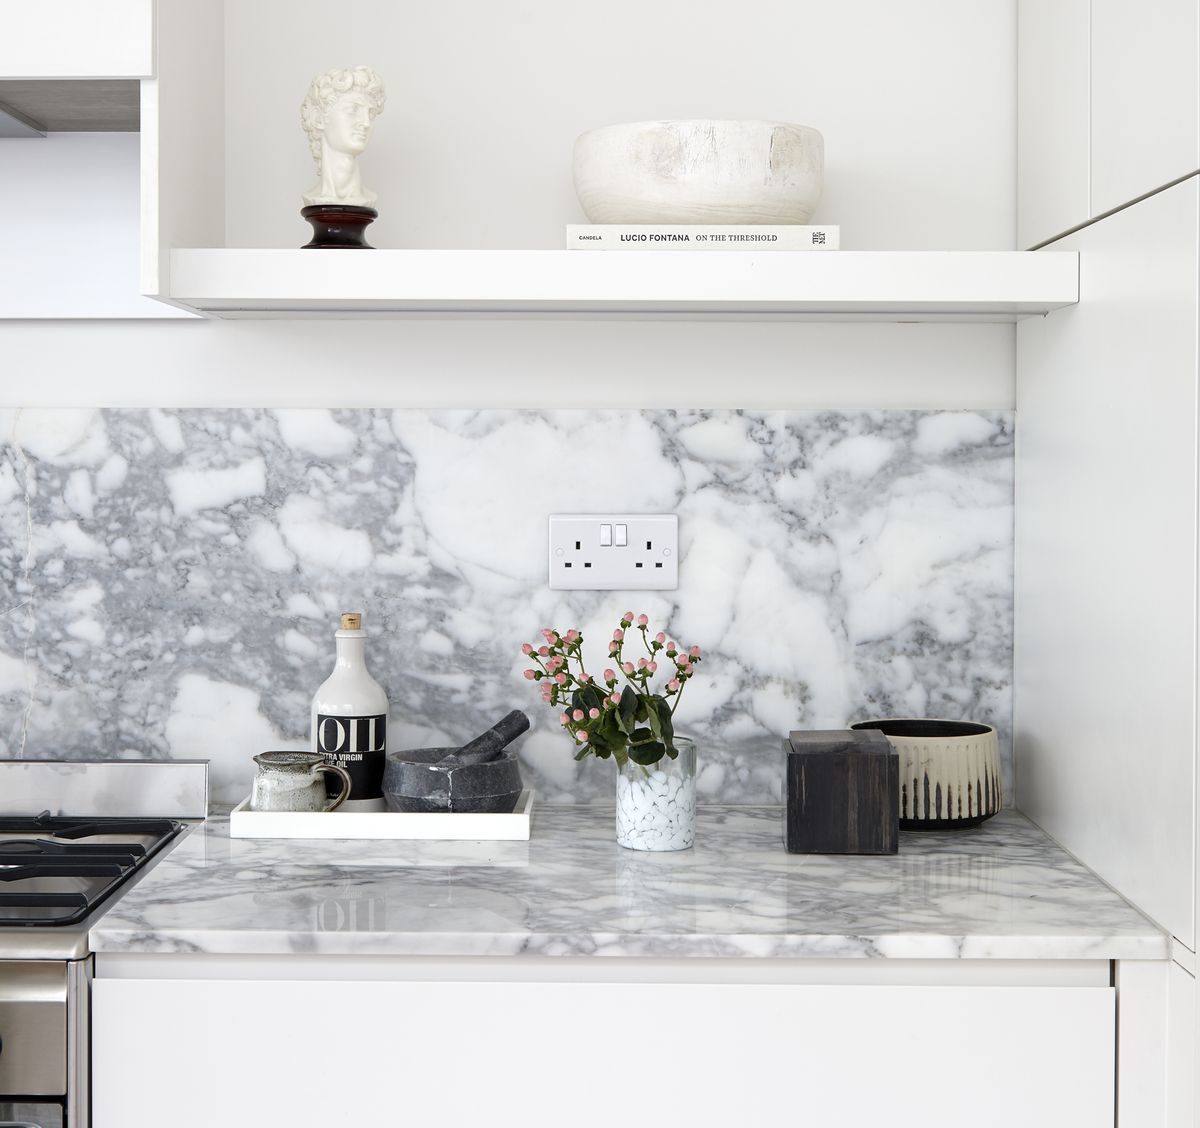 How do you declutter kitchen countertops? 5 steps you can take today towards a more minimalist space